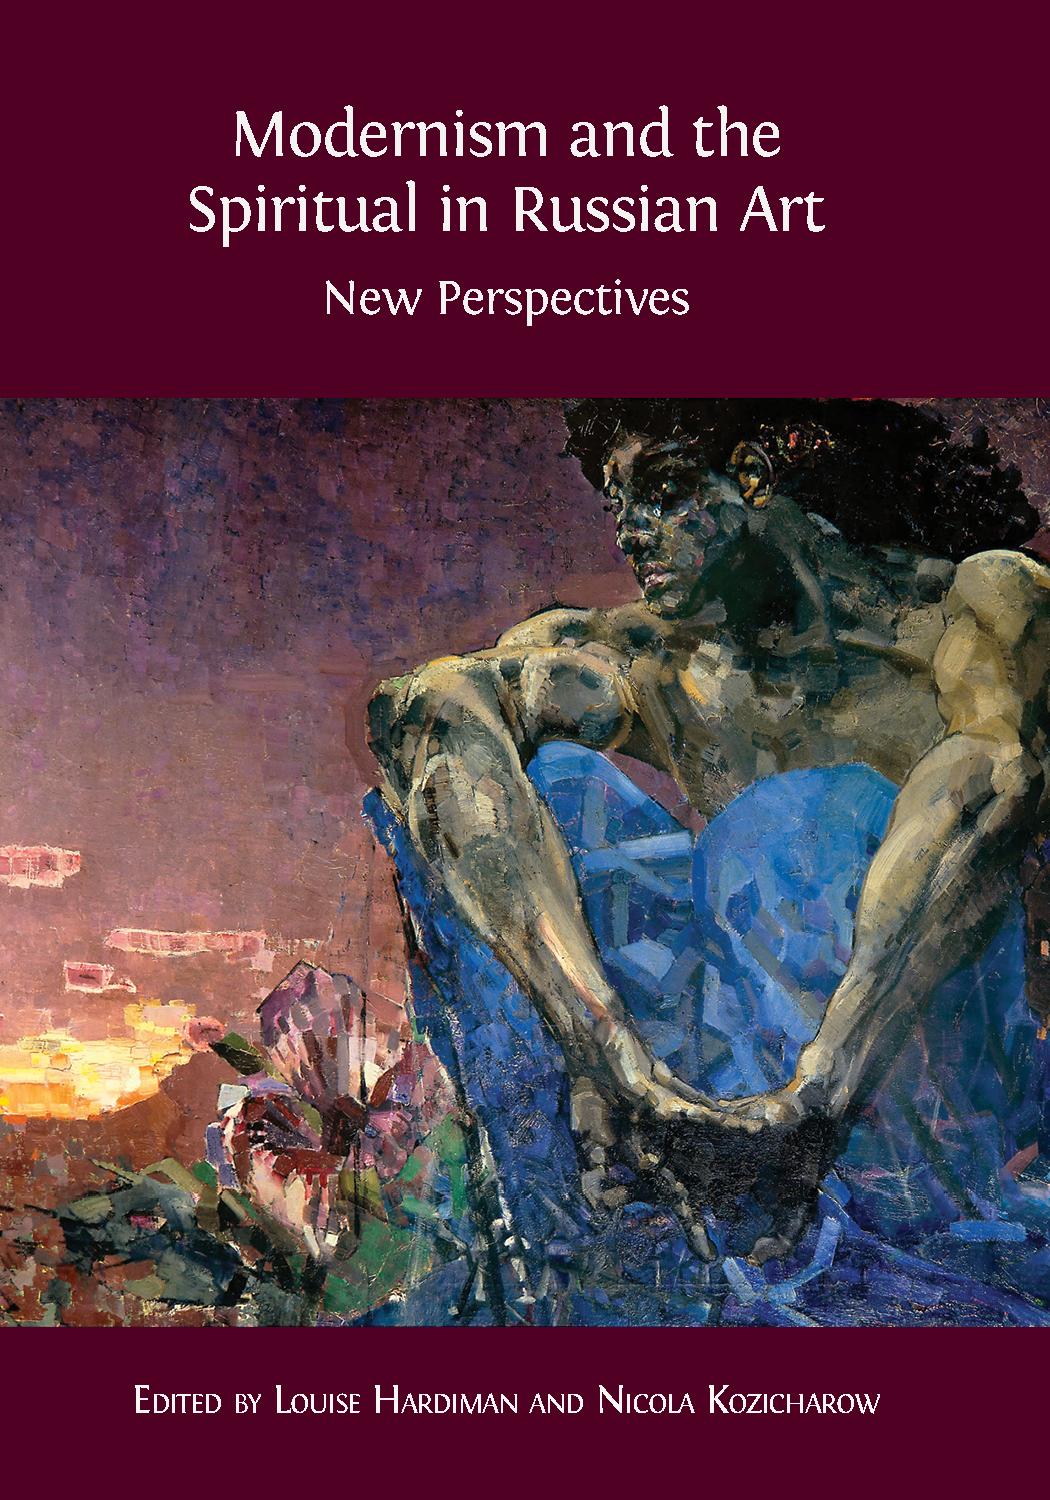 The Department is delighted to announce the publication of 'Modernism and the Spiritual in Russian Art: New Perspectives', edited by Dr Louise Hardiman and Dr Nicola Kozicharow, both of whom completed their PhDs in the department